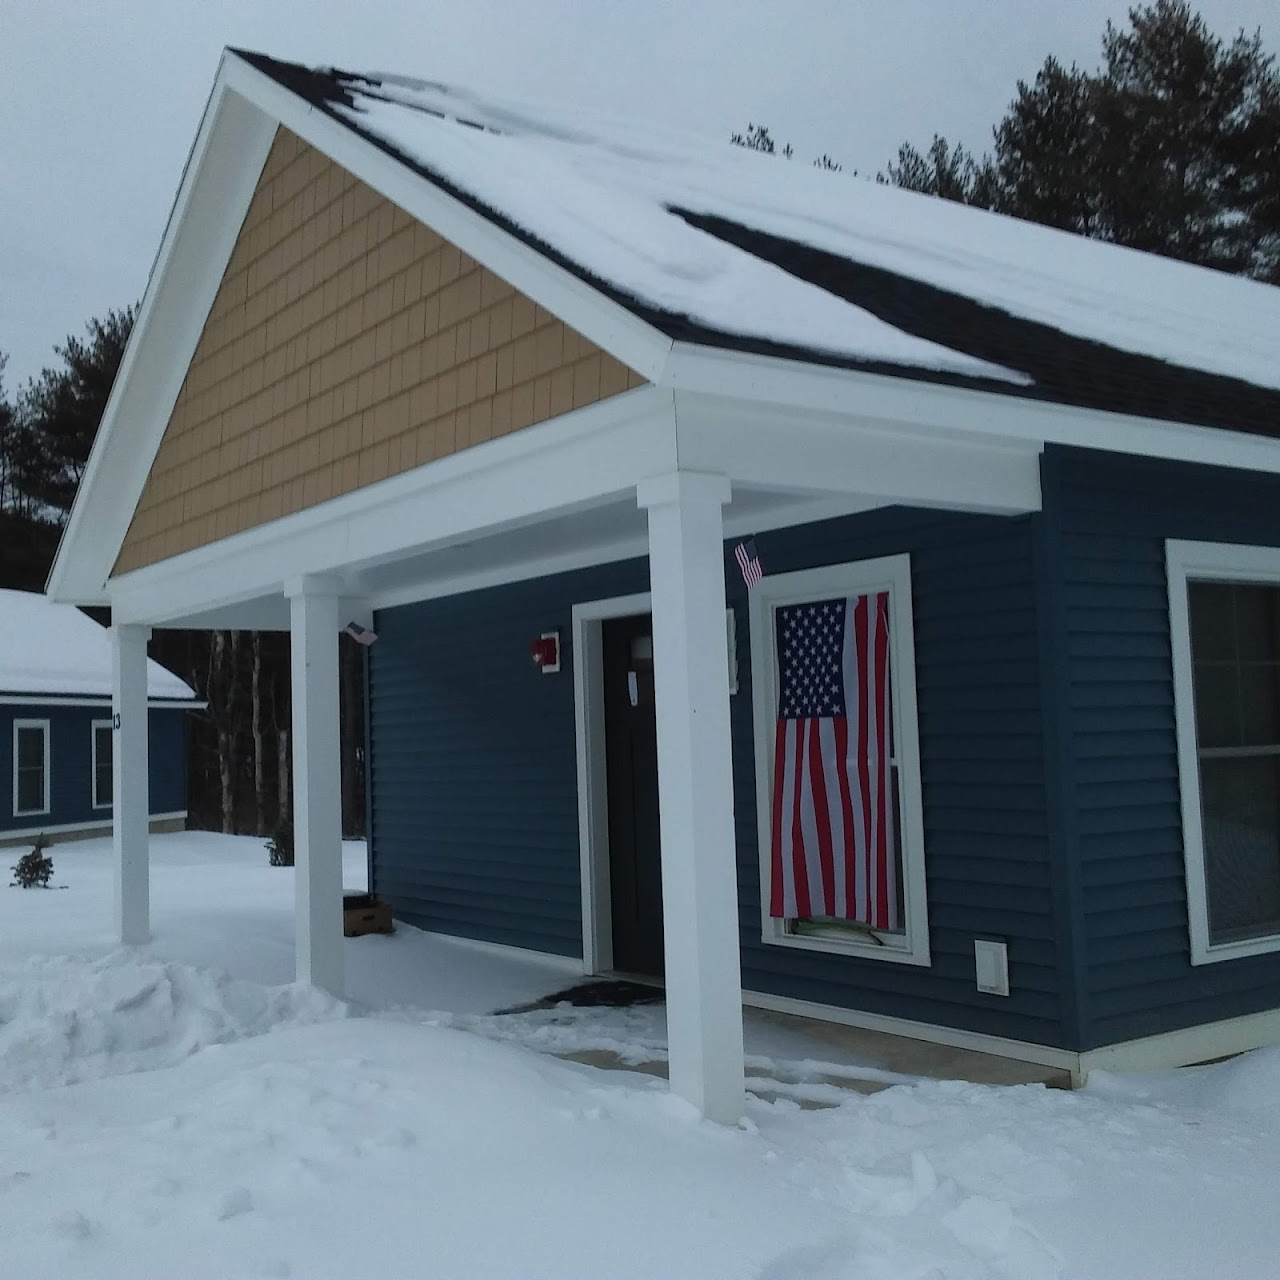 Photo of CABIN IN THE WOODS. Affordable housing located at 4 EAGLE DRIVE CHELSEA, ME 04330